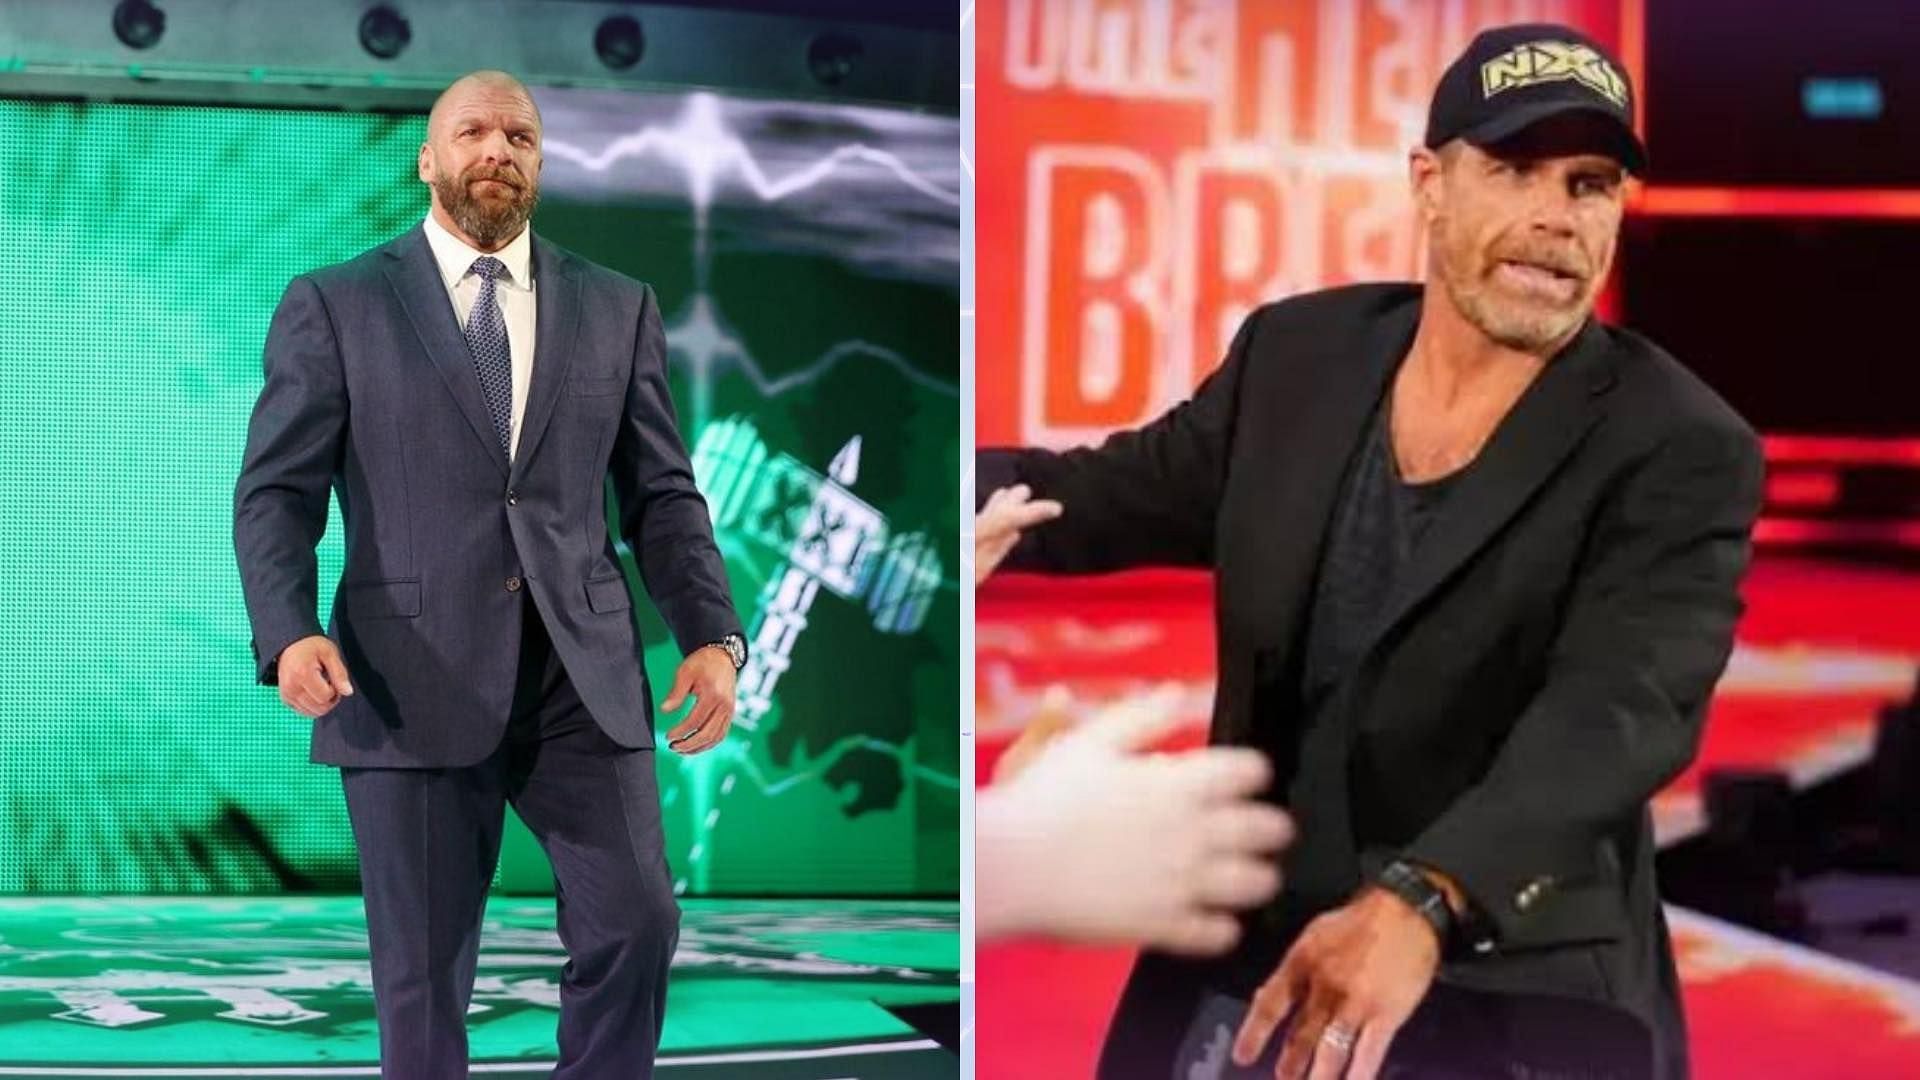 Triple H and Shawn Michaels may make changes to WWE NXT